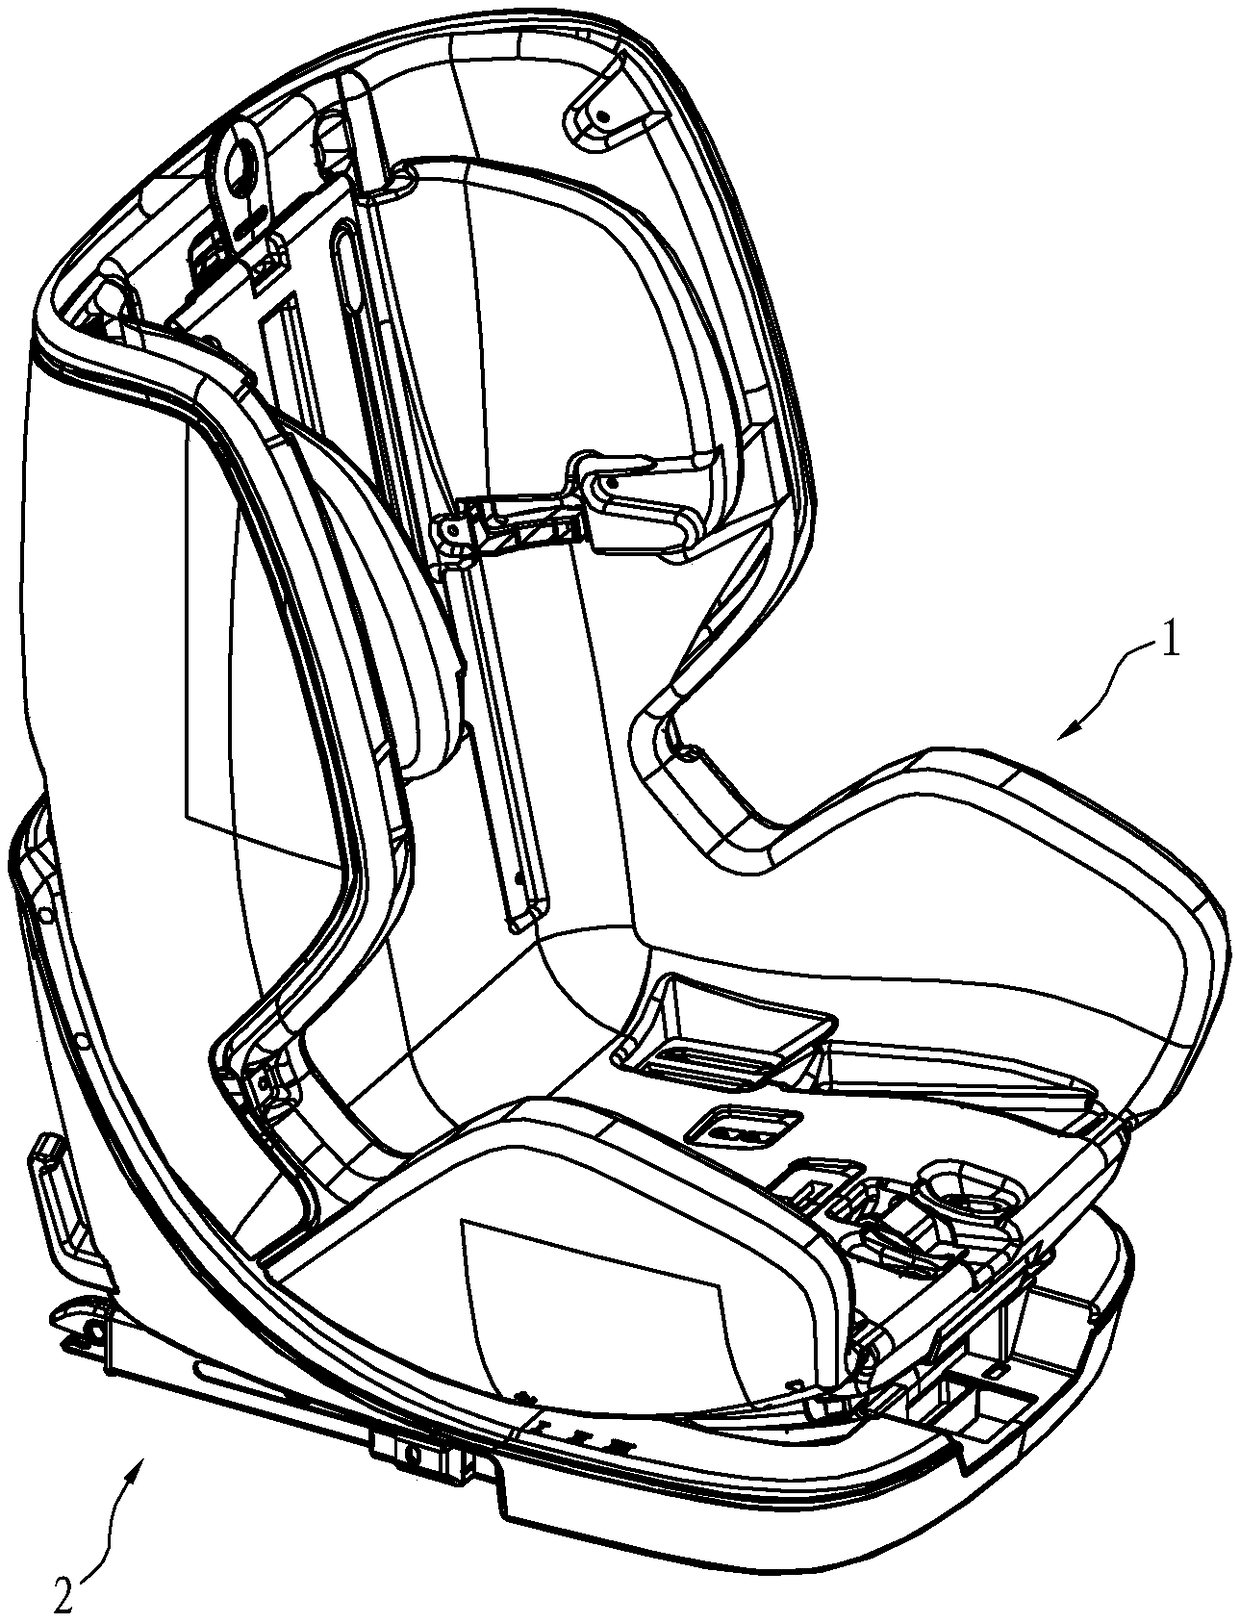 Safety seat